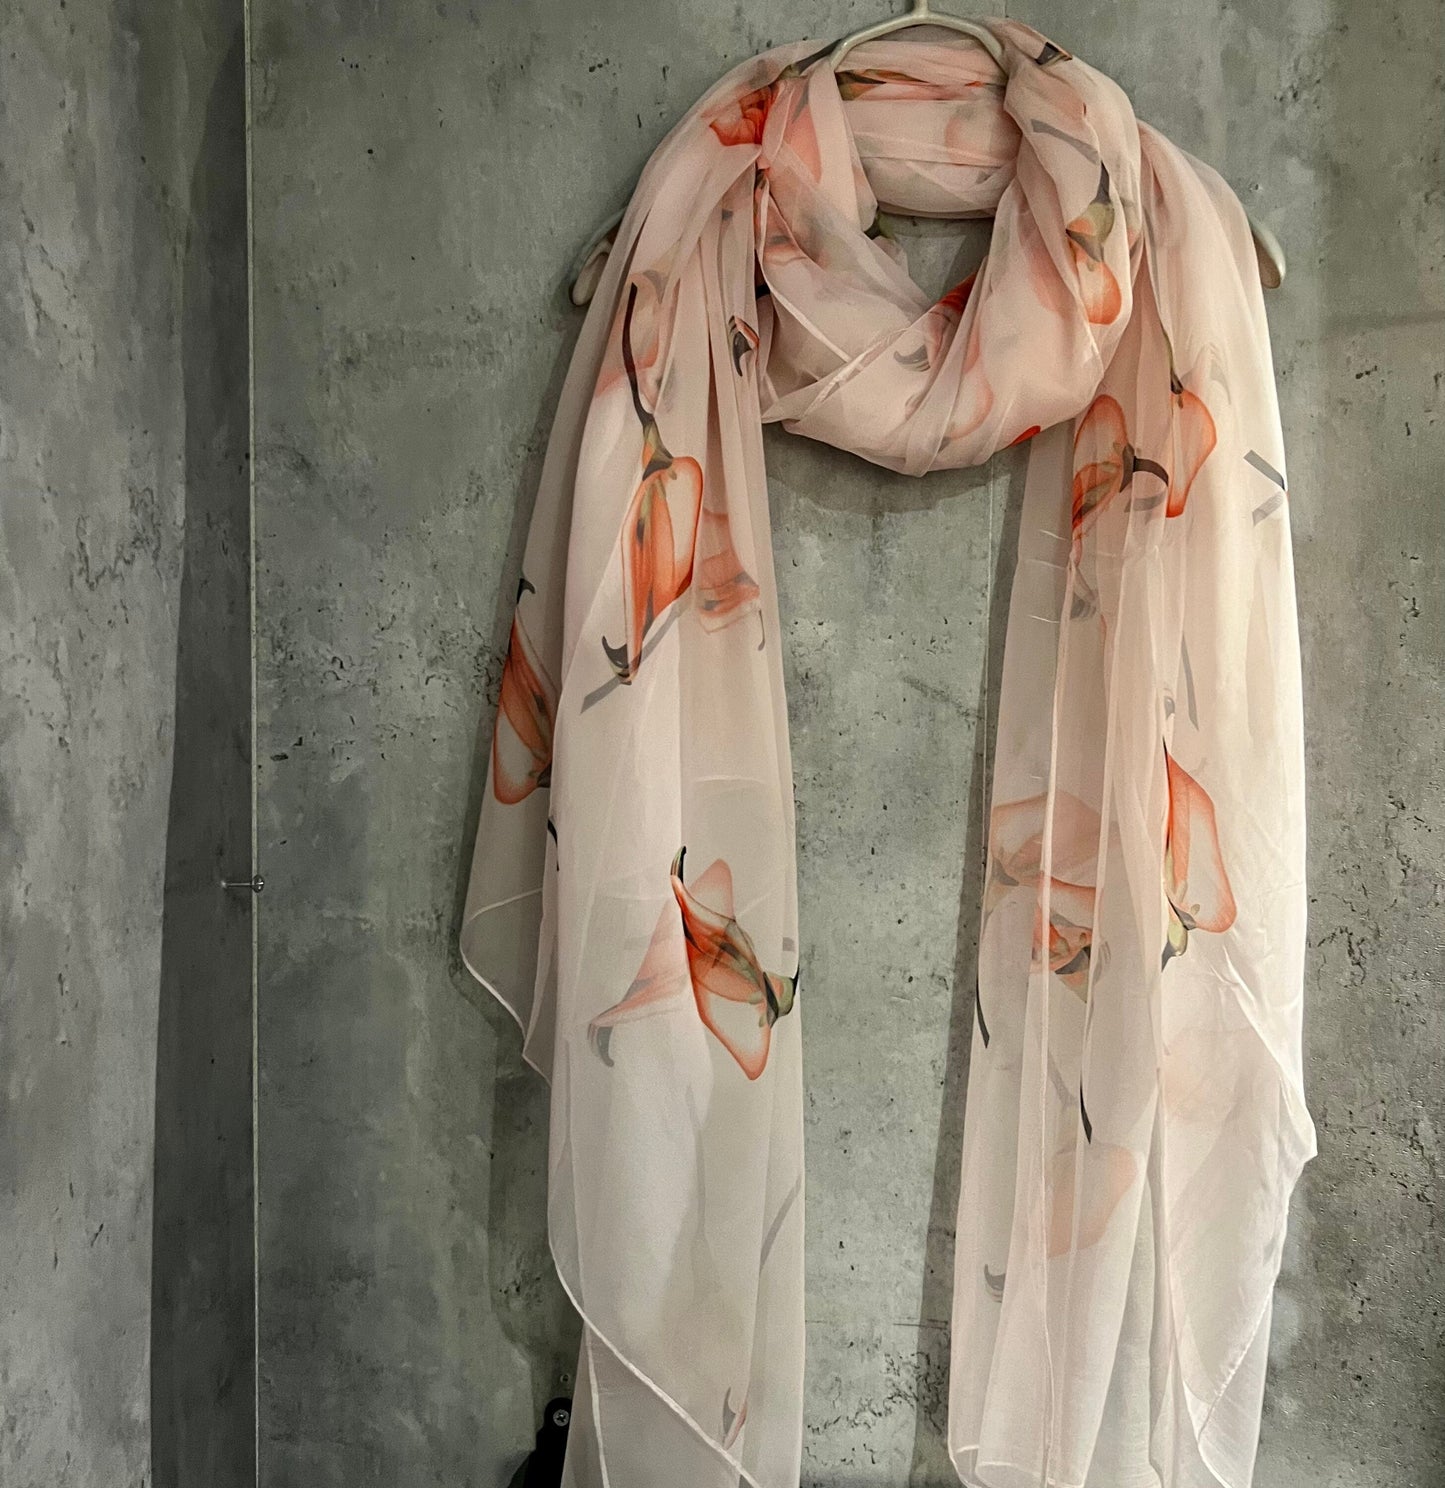 Calla Lily Flowers Pink Silk Scarf/Spring Summer Autumn Scarf/Gifts For Her Birthday Christmas/Gifts For Mum/Wedding Scarf/Evening Scarf